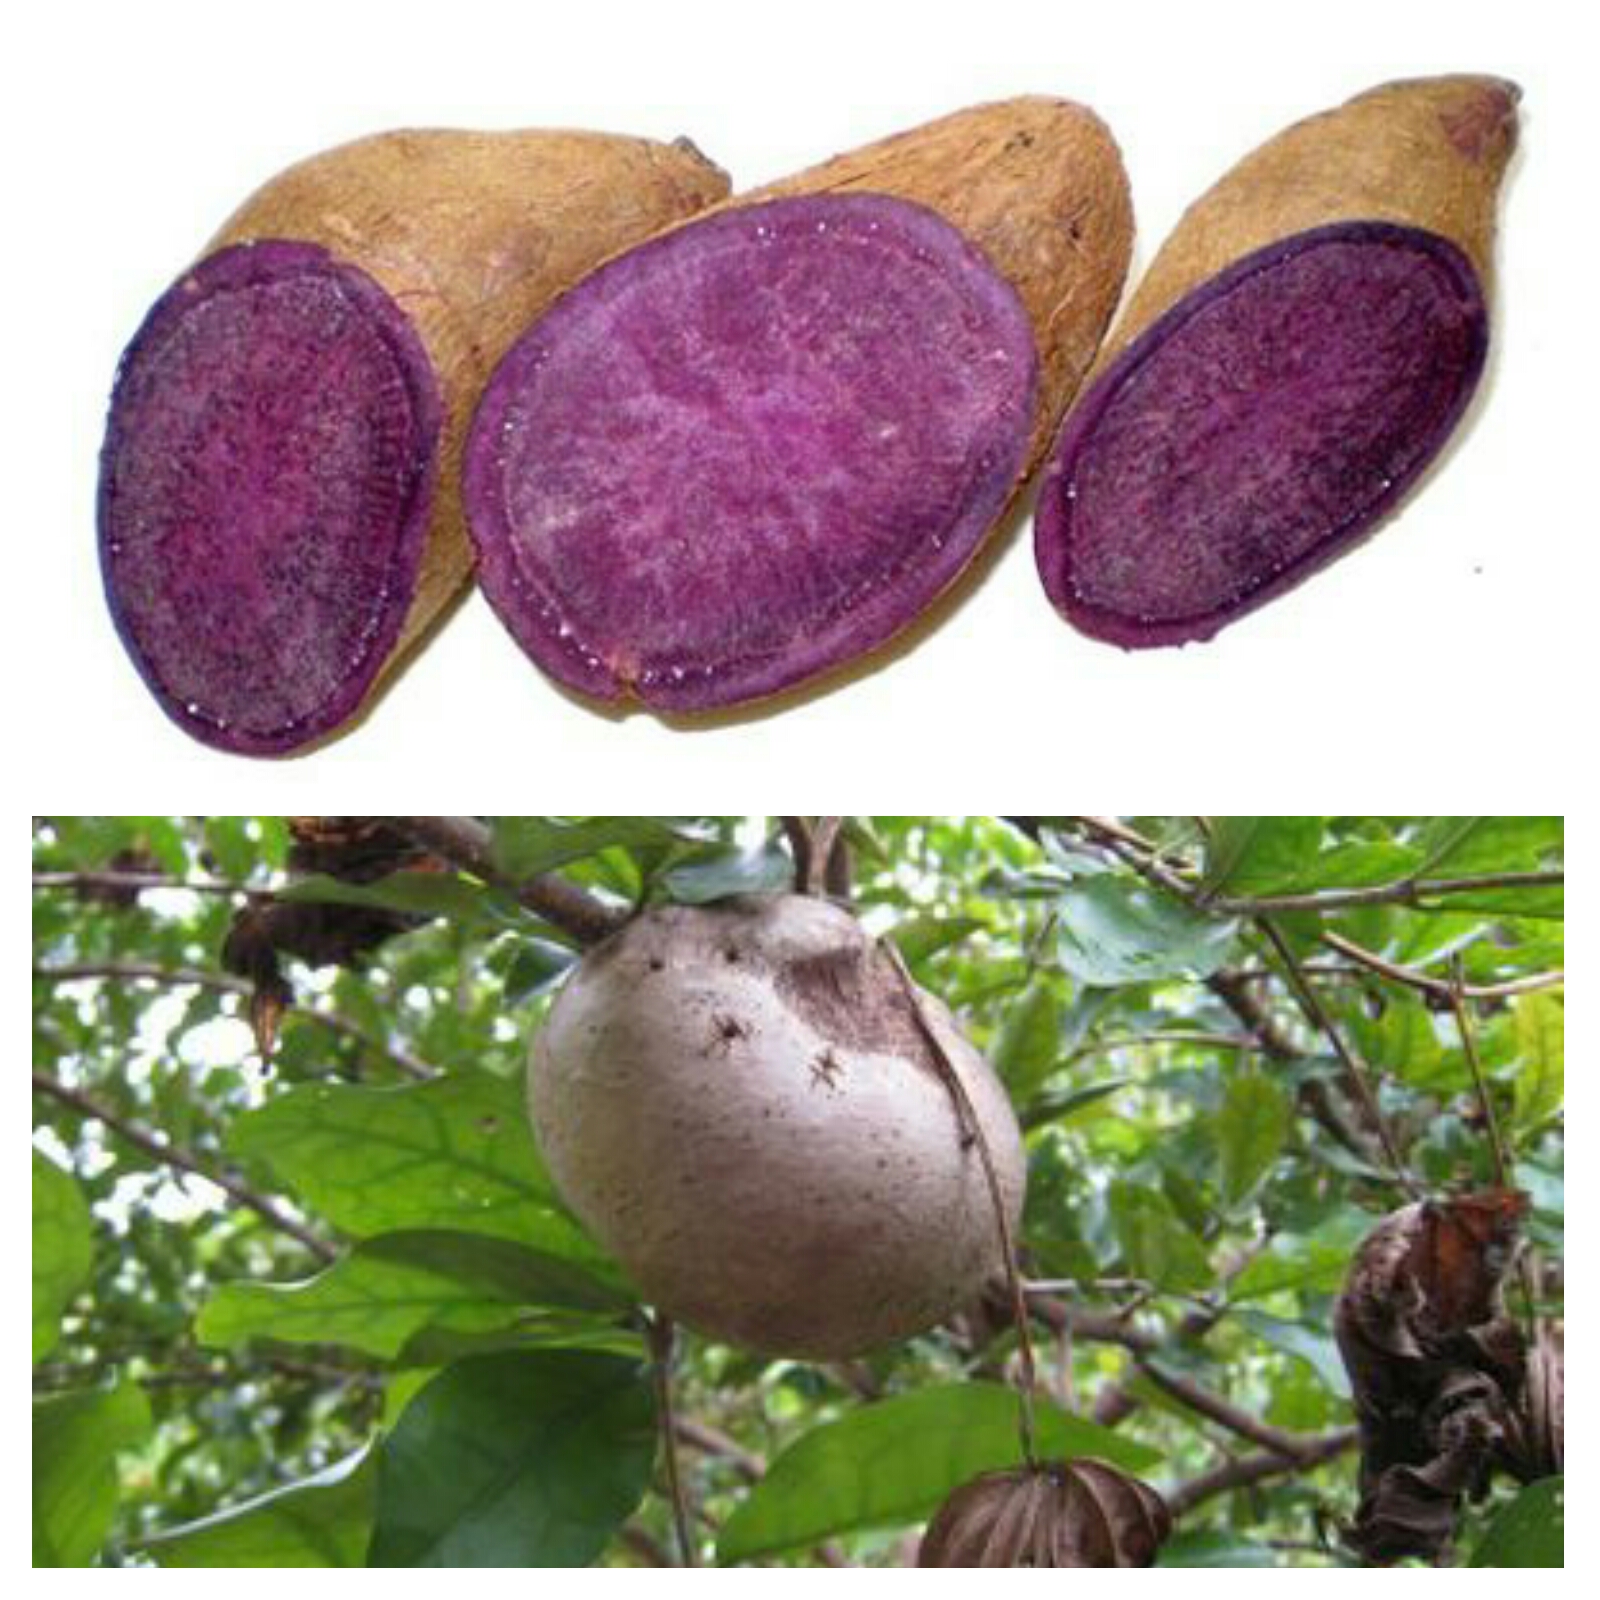 7. #TheTruth – “UBE” also known as “PURPLE YAM”. Is this ...